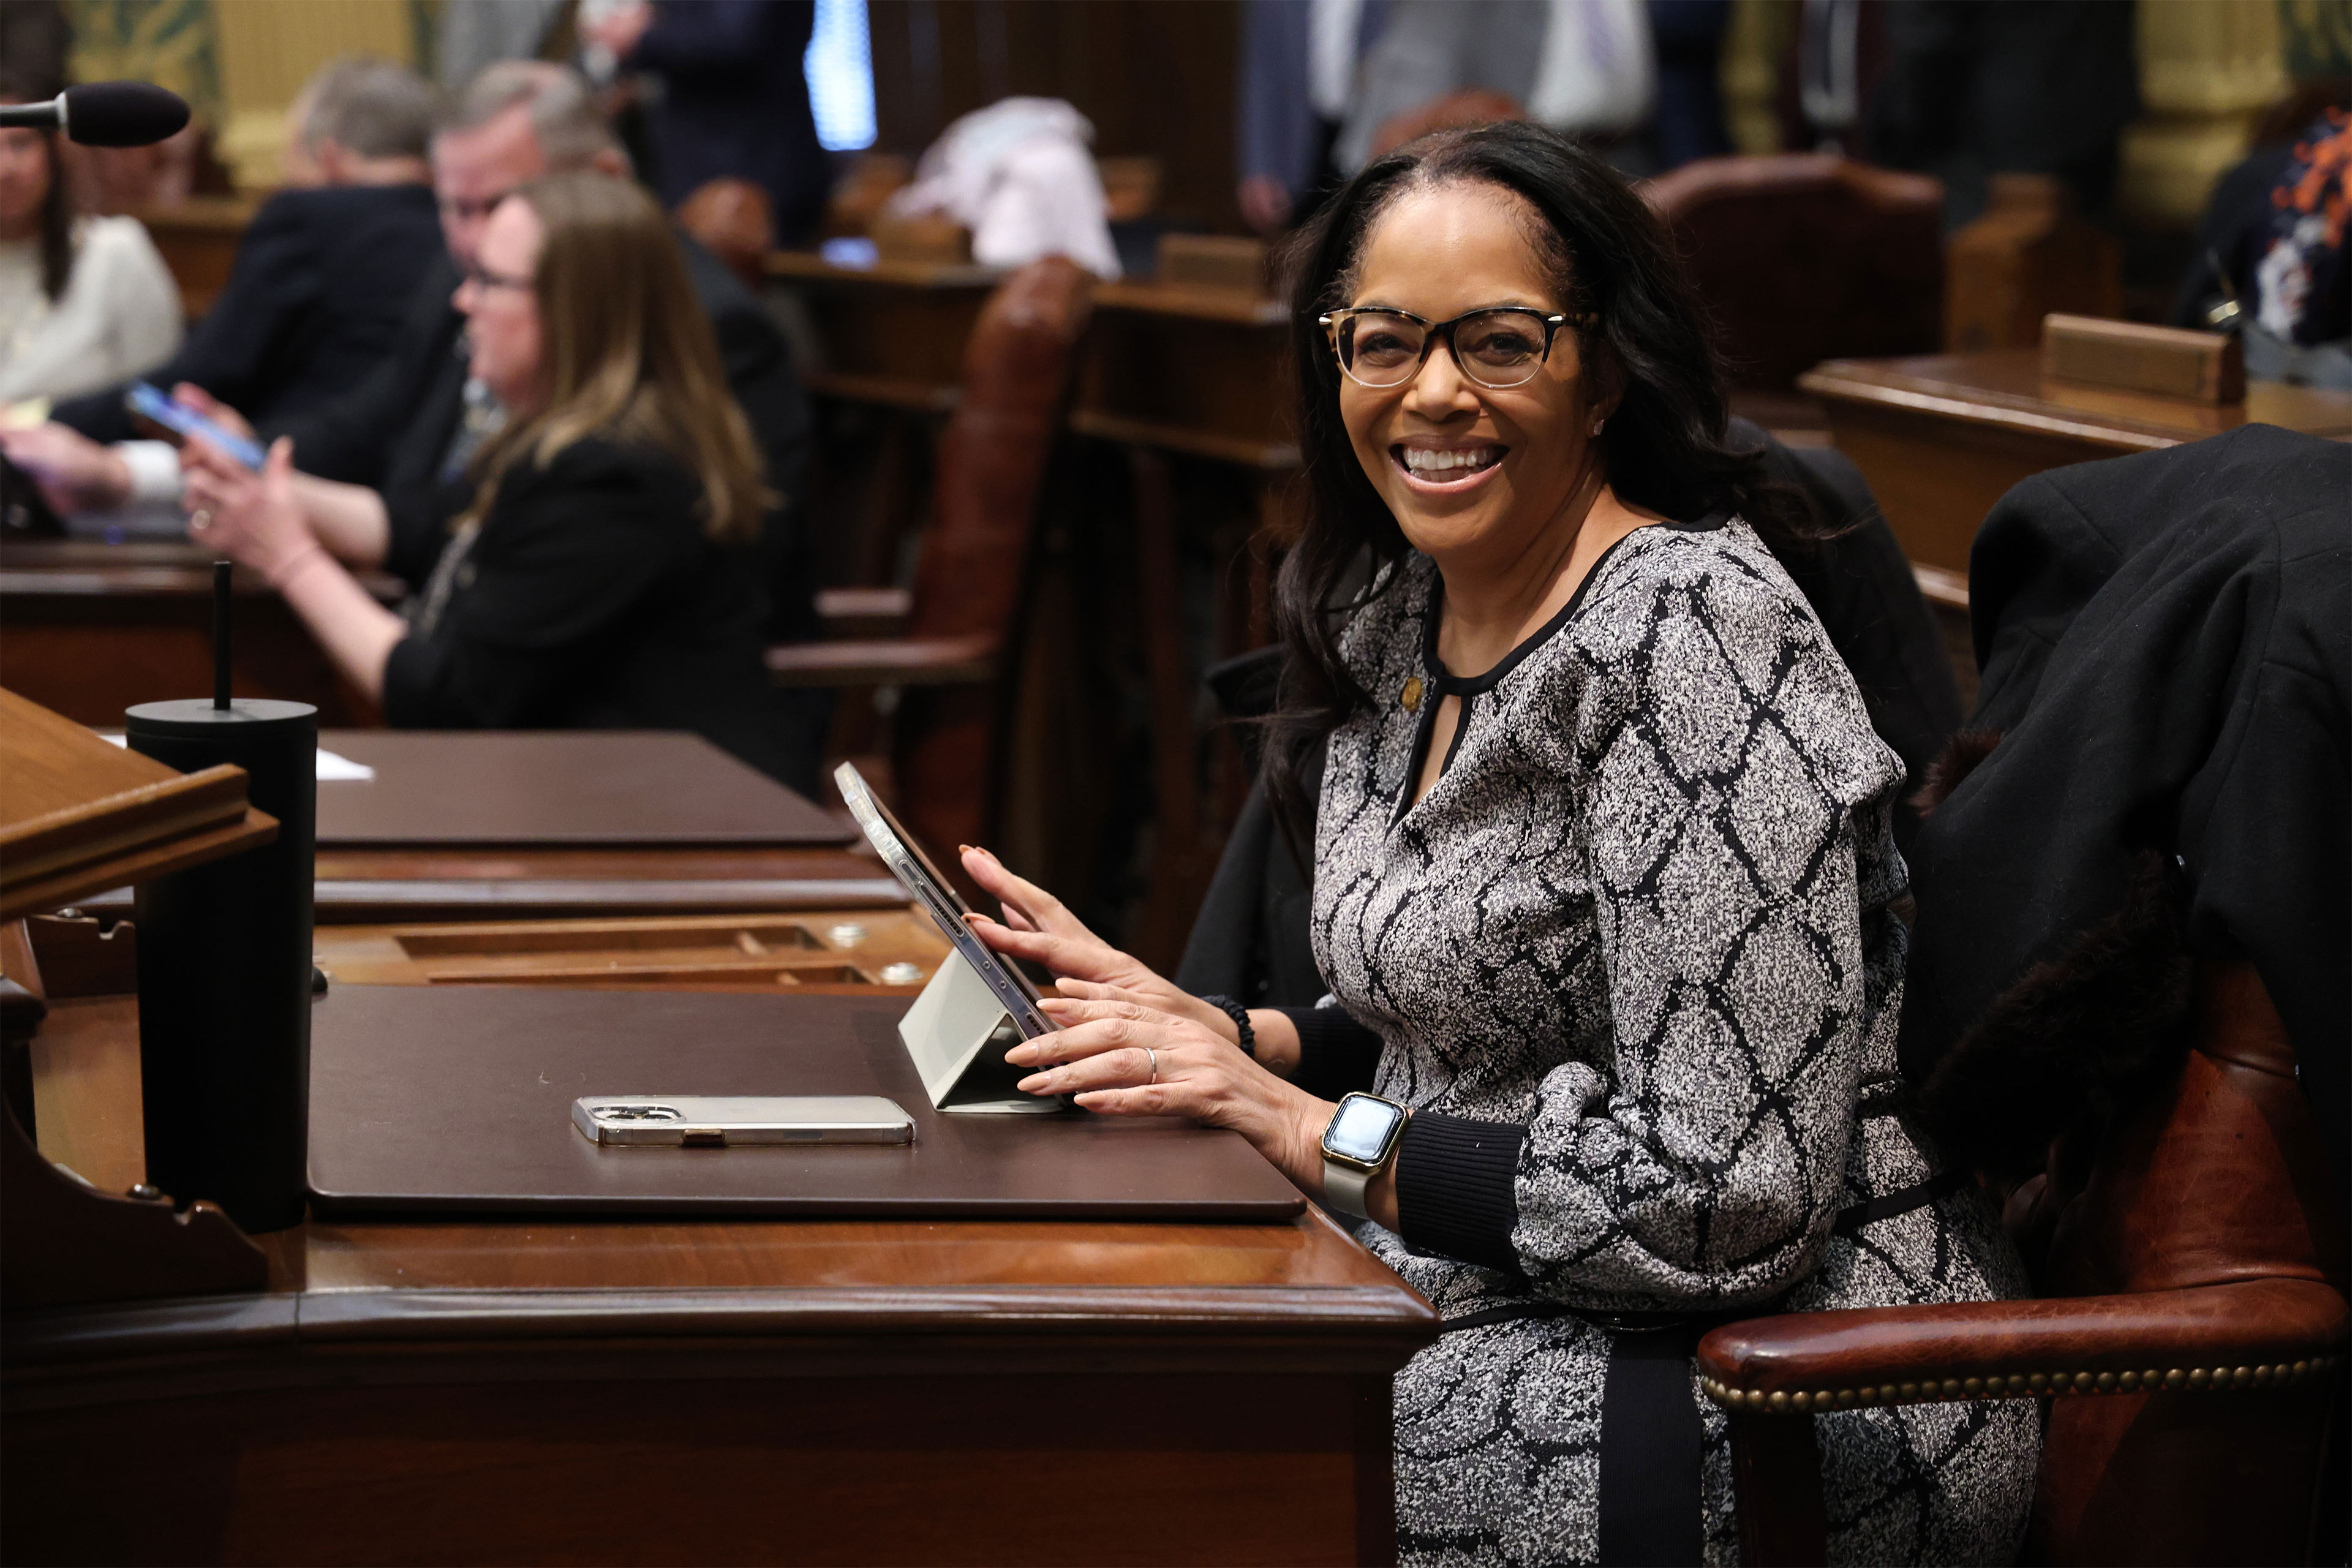 A photo of a Michigan Representative Karen Whitsett smiling for the camera inside the state's House of Representatives.